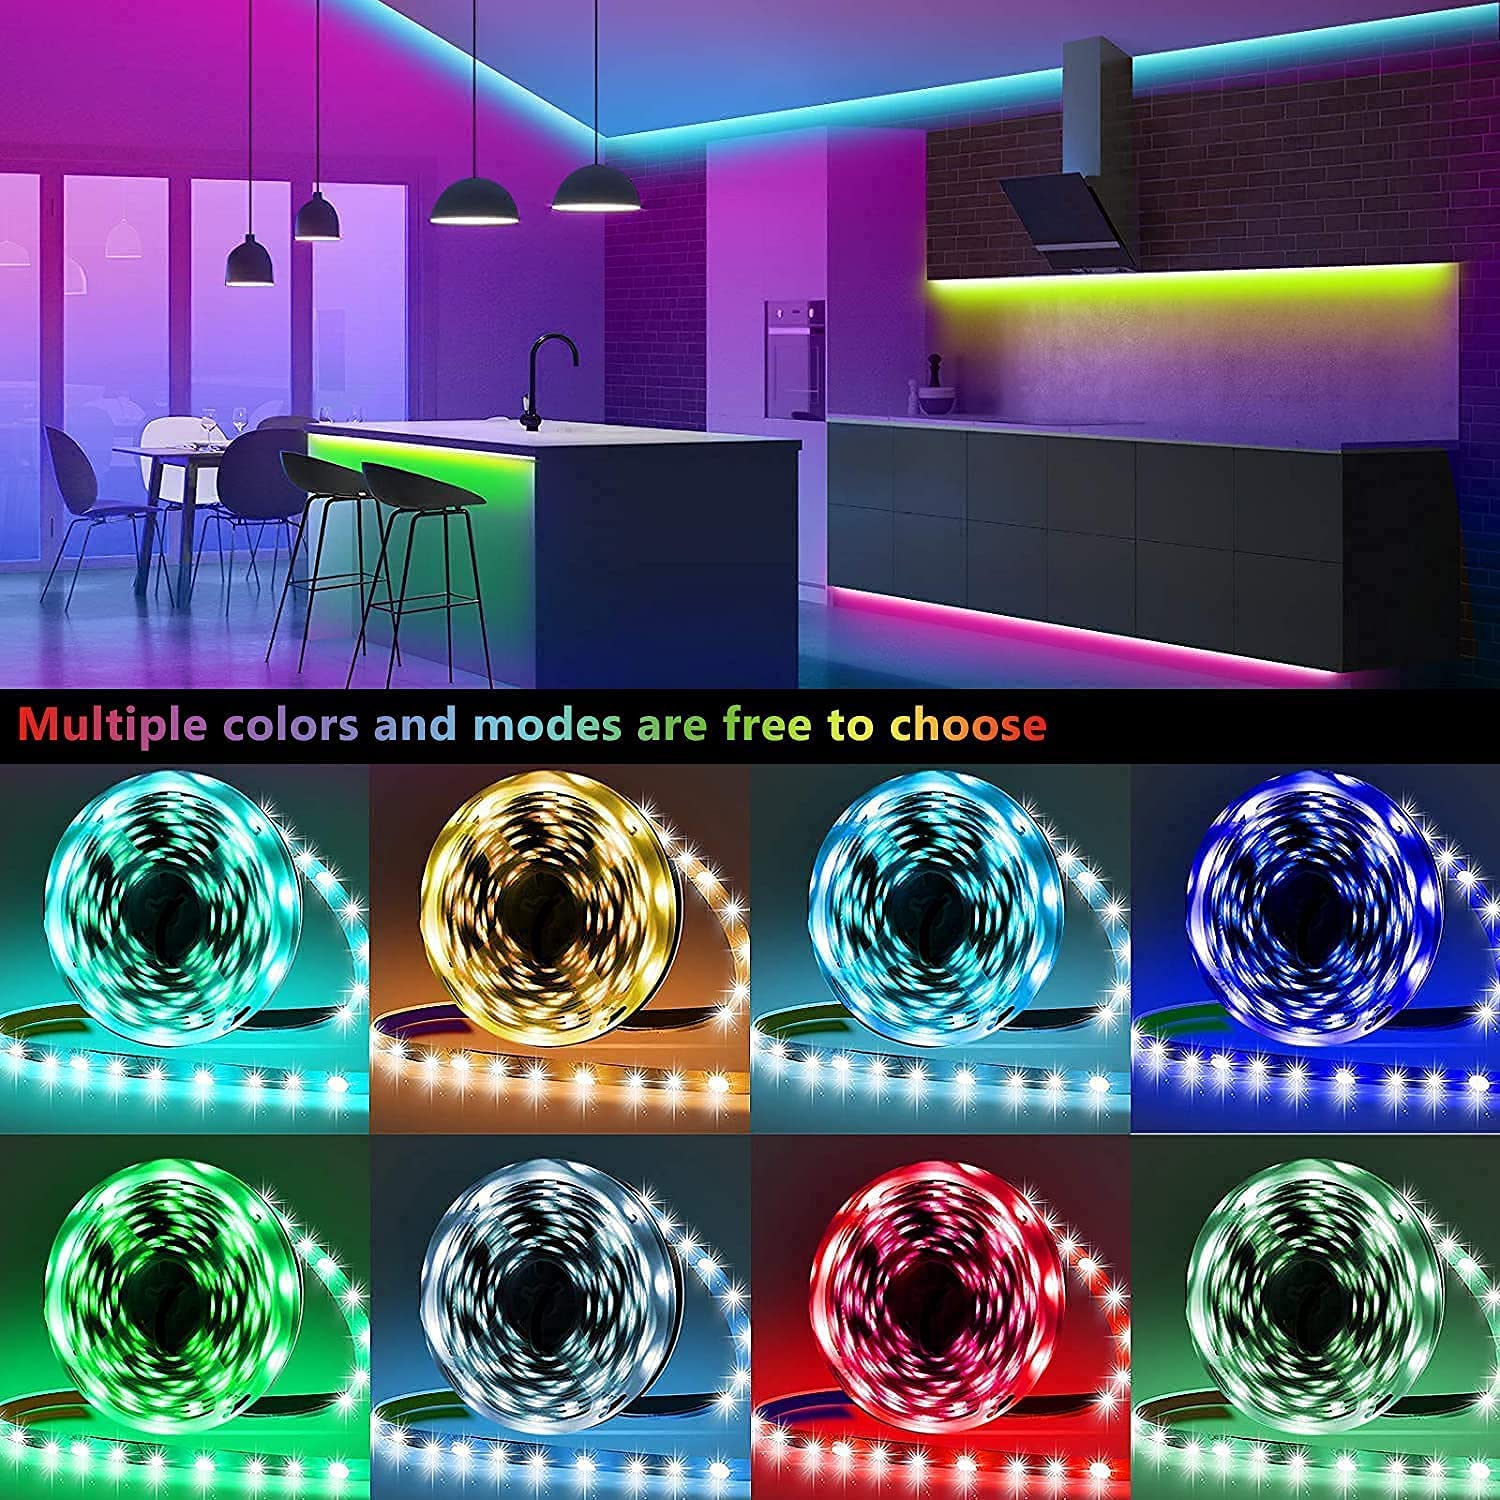 Tenmiro Led Lights for Bedroom, Music Sync LED Rope Lights APP Control with Remote, RGB Led Strip Lights for Room Kitchen Party Home Decoration (65.6ft)